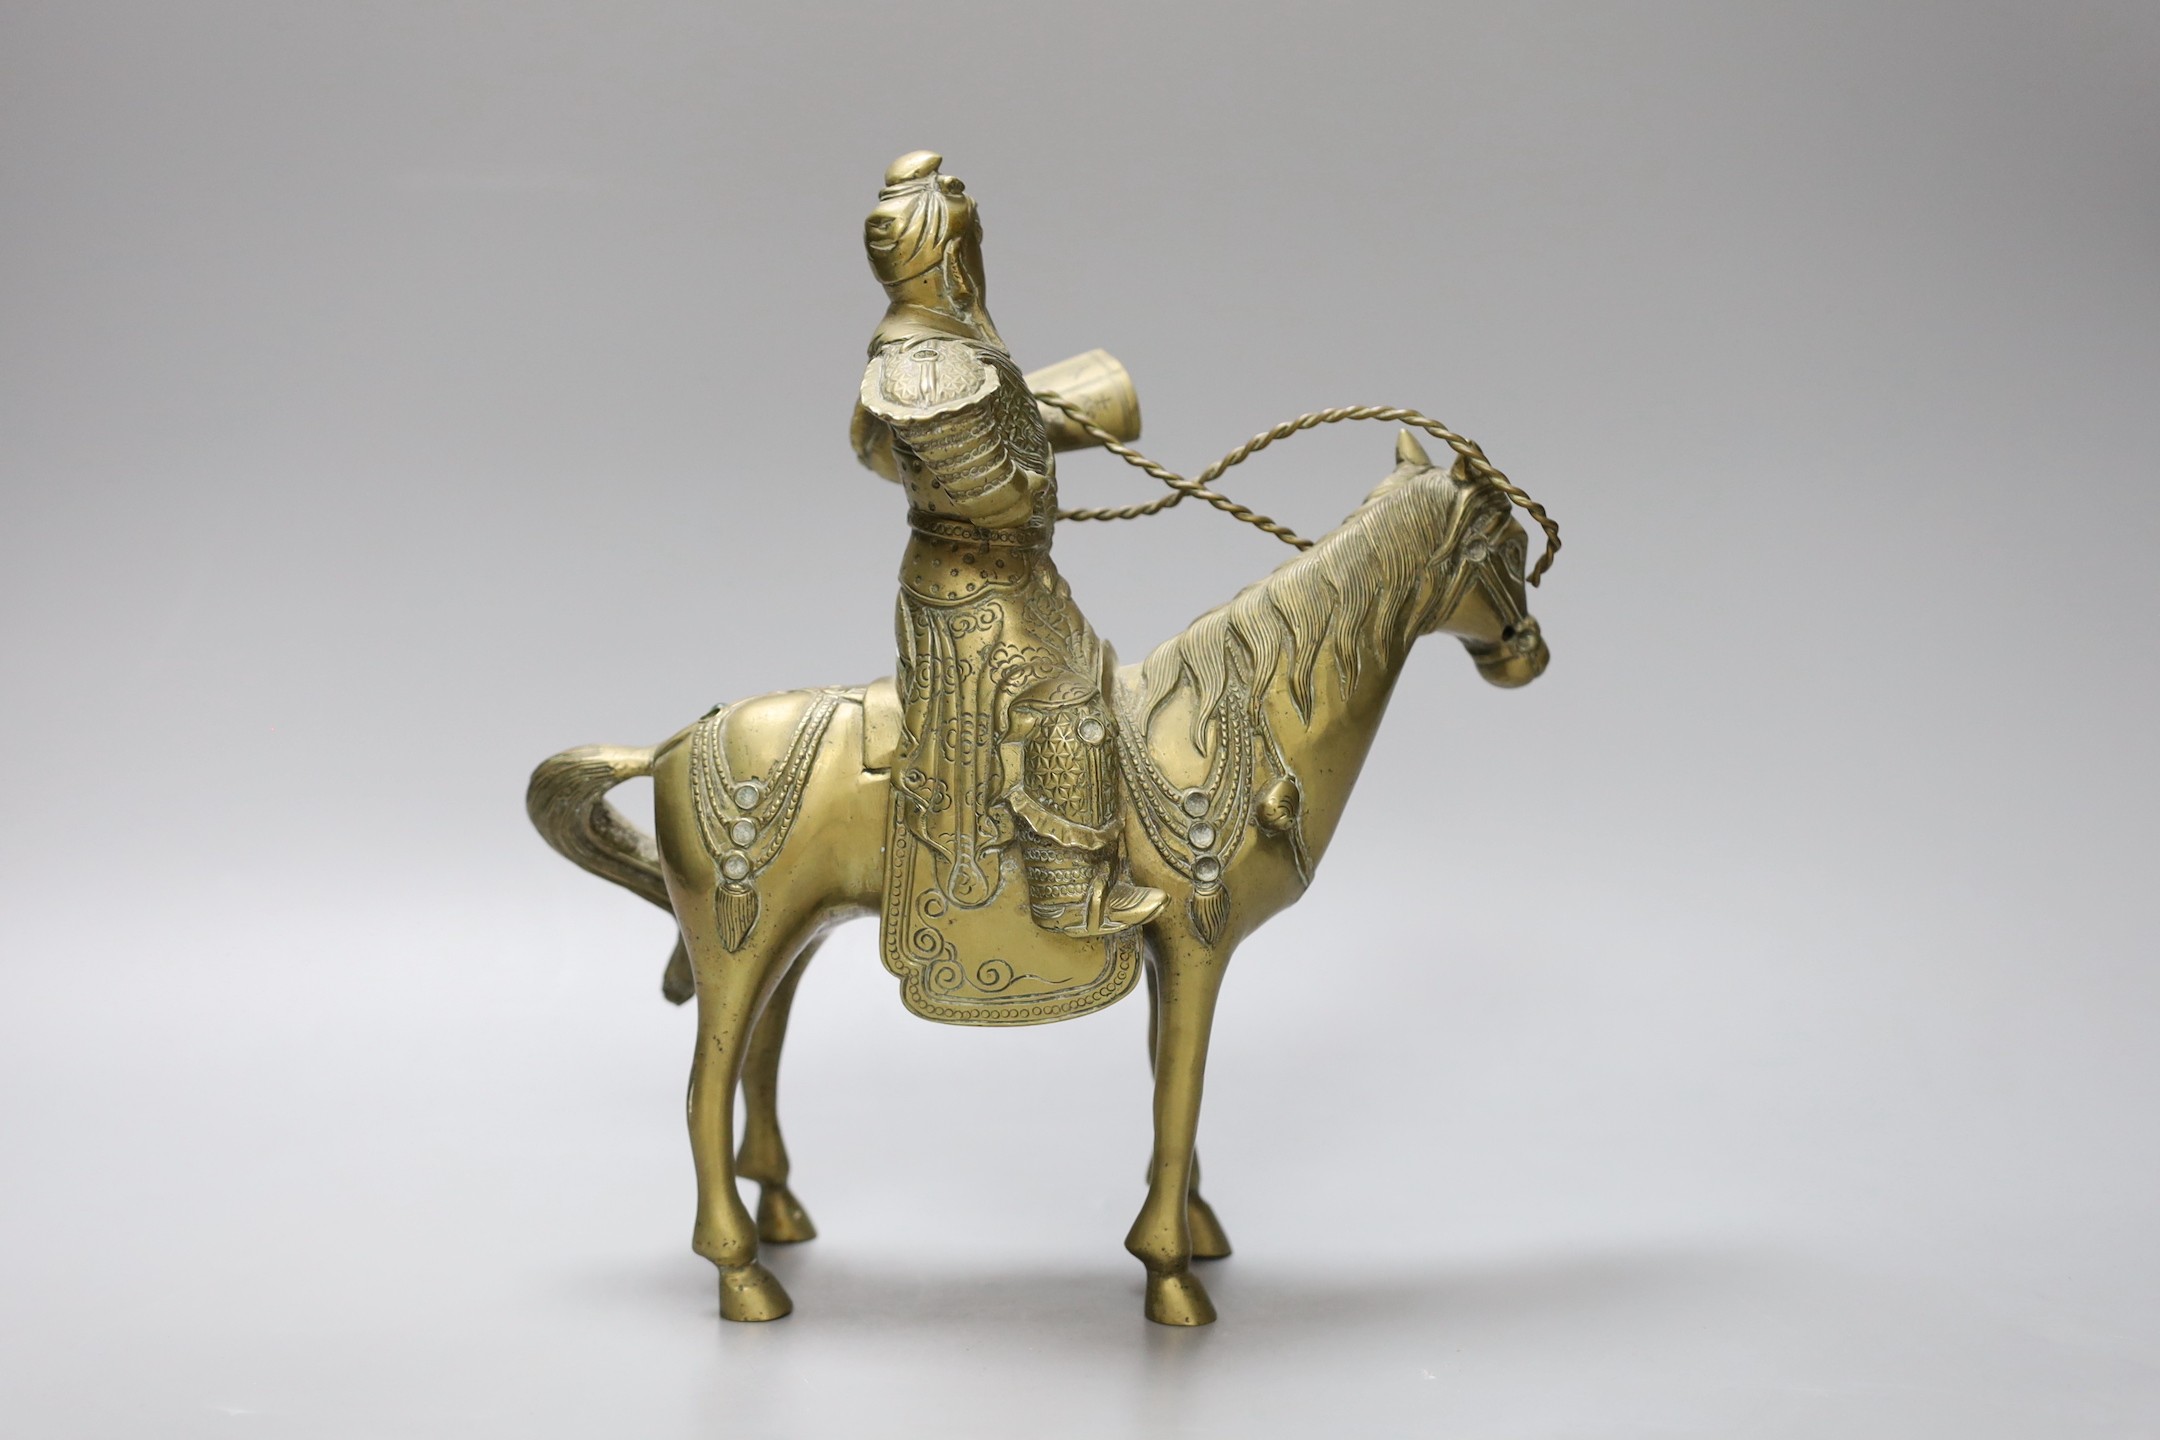 An early 20th century Chinese bronze group of Guandi riding a horse, 24 cms high